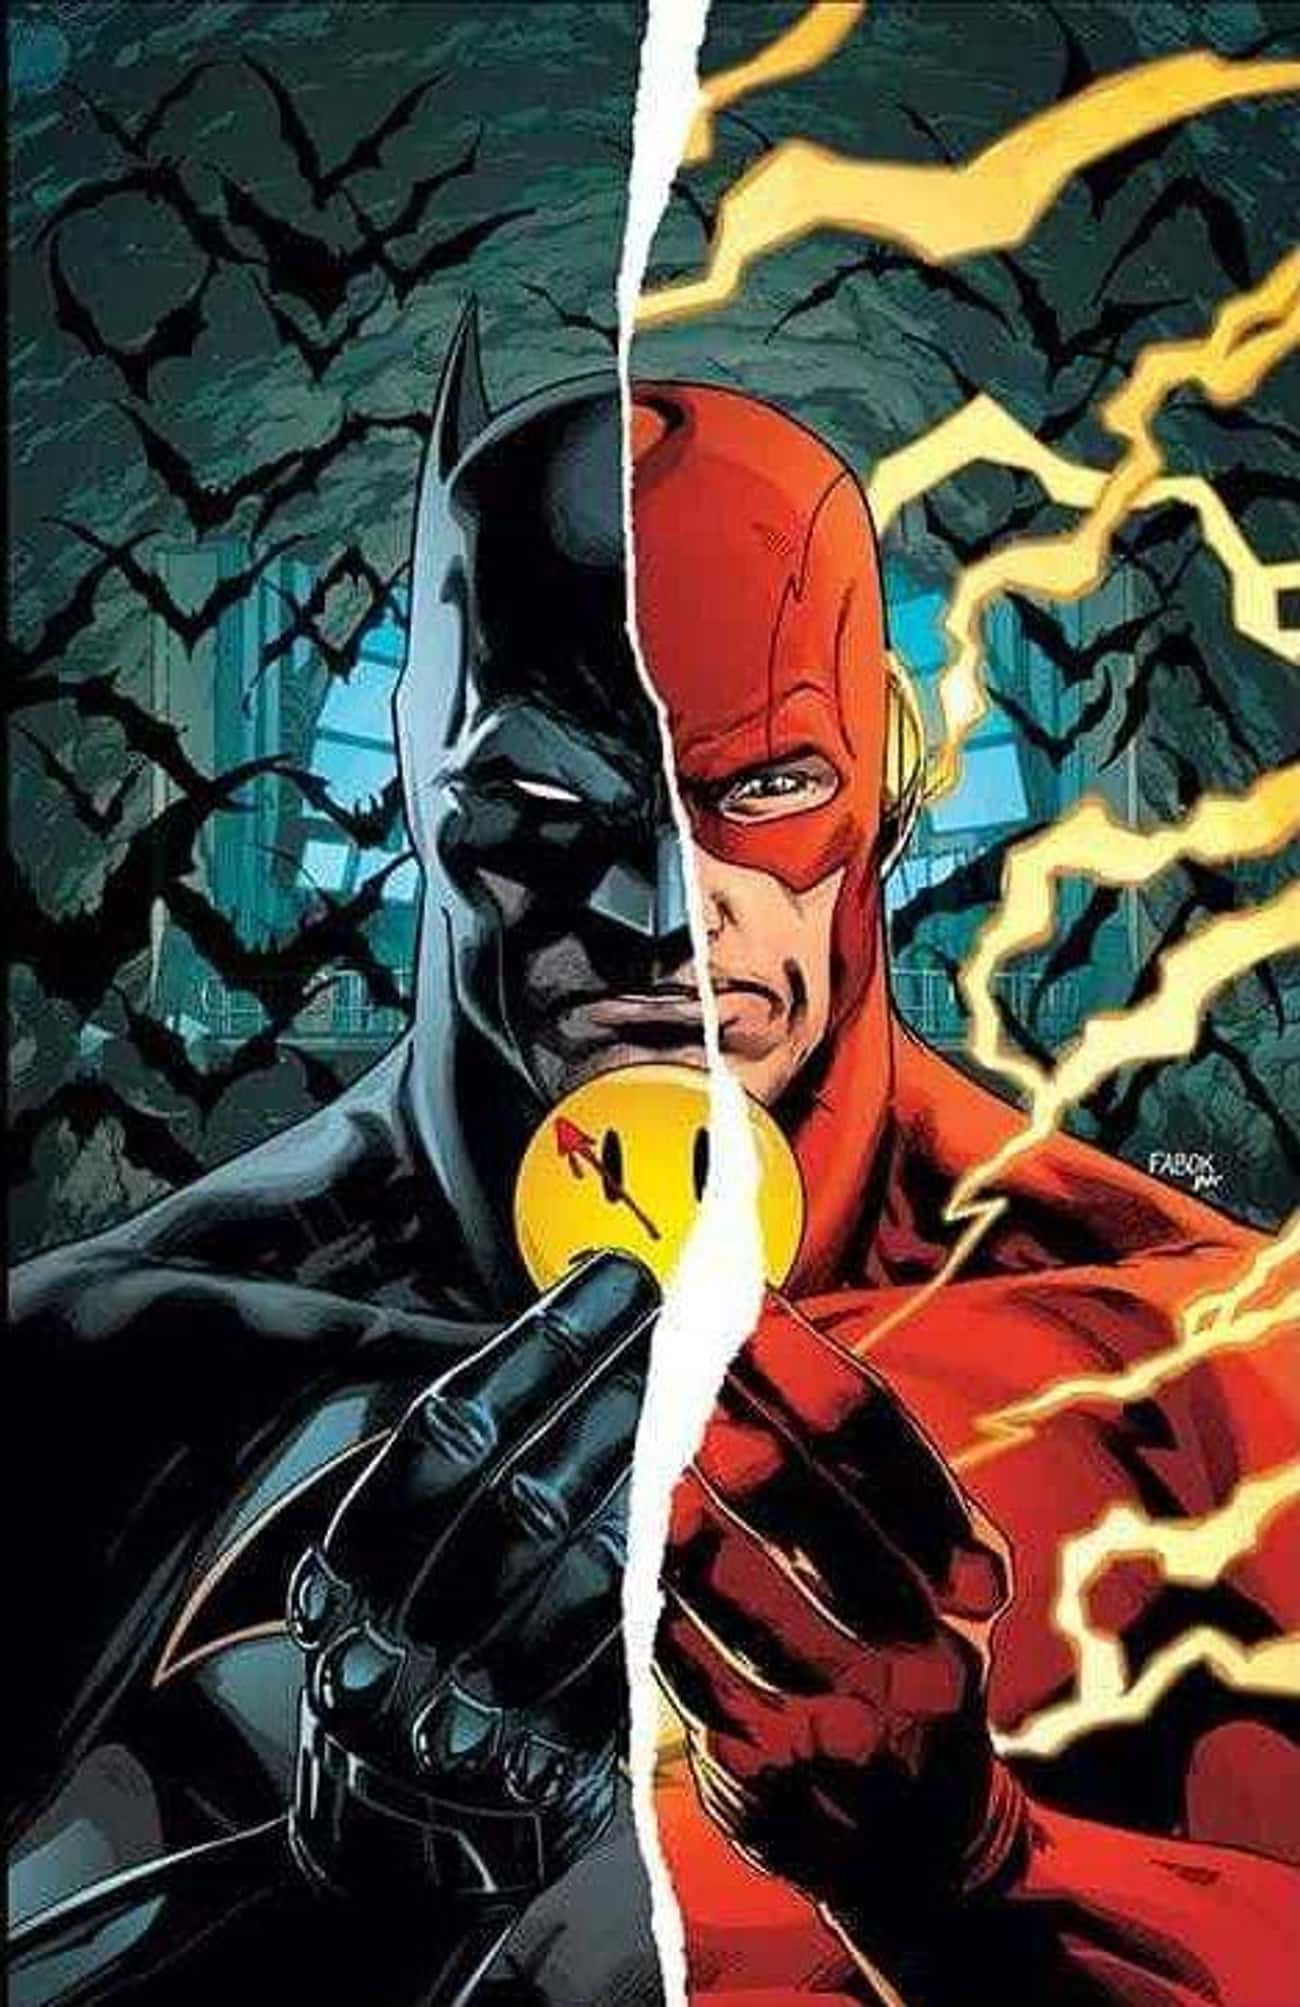 The Story Was Set Up In 2016 With DC’s Rebirth And “The Button”